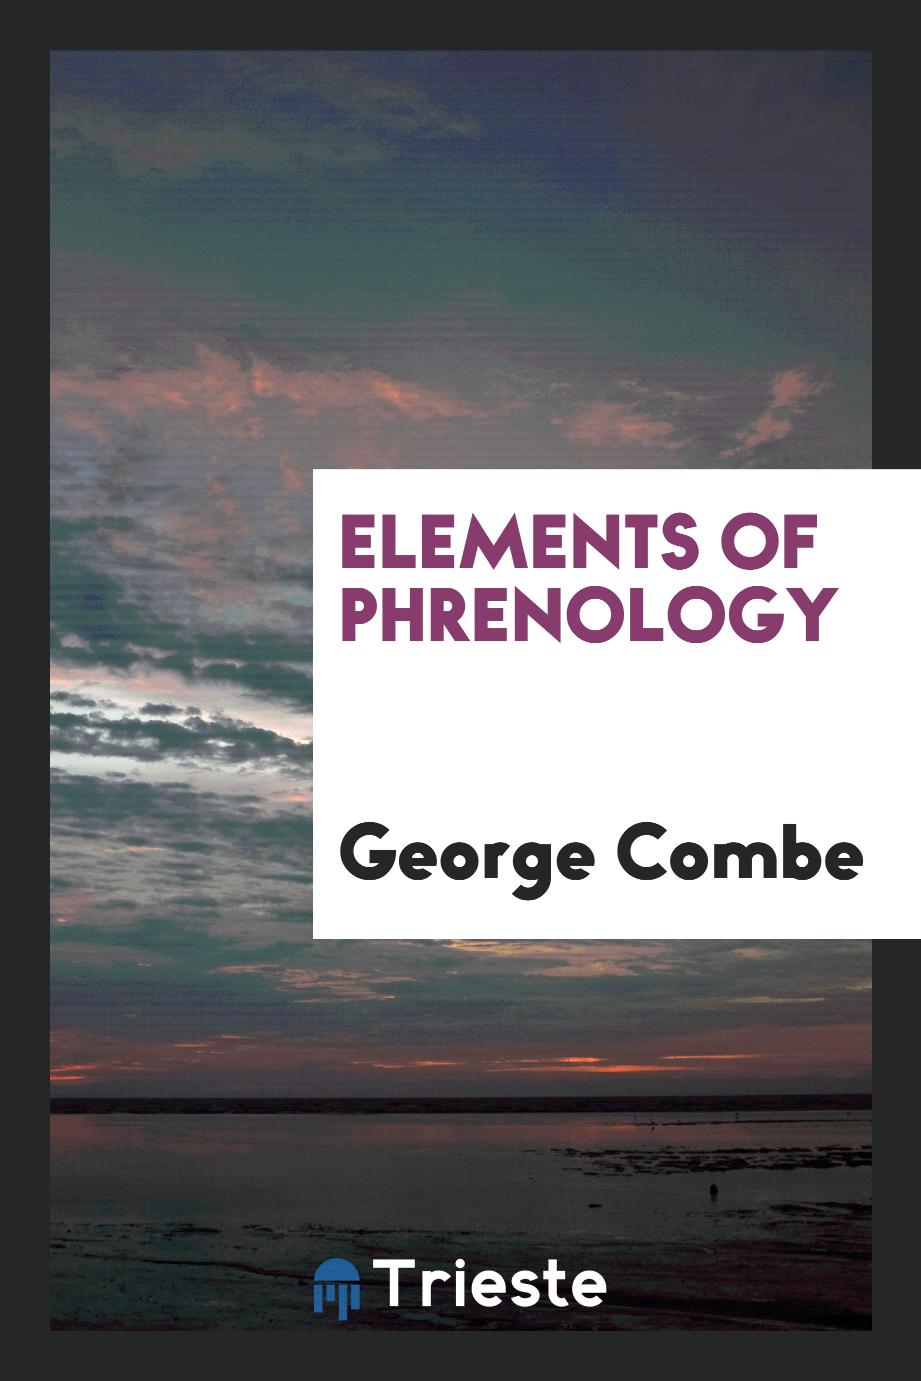 George Combe - Elements of Phrenology